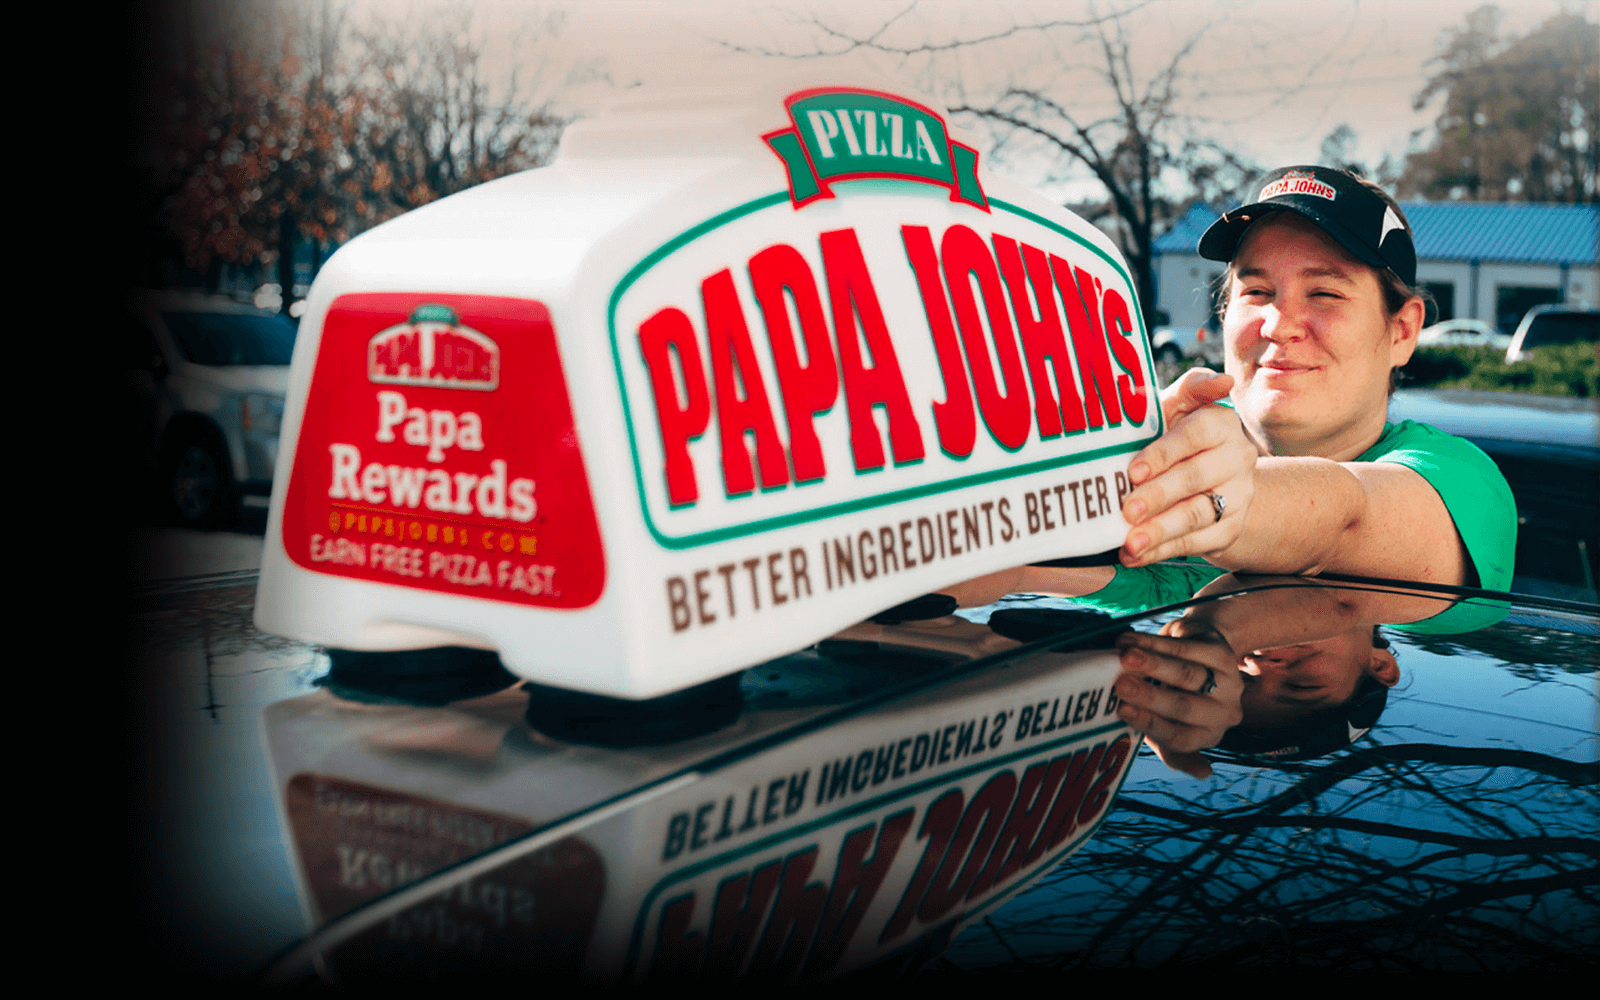 Searching for Pizza Delivery Driver Jobs? Look no further – Start Your Career Today!